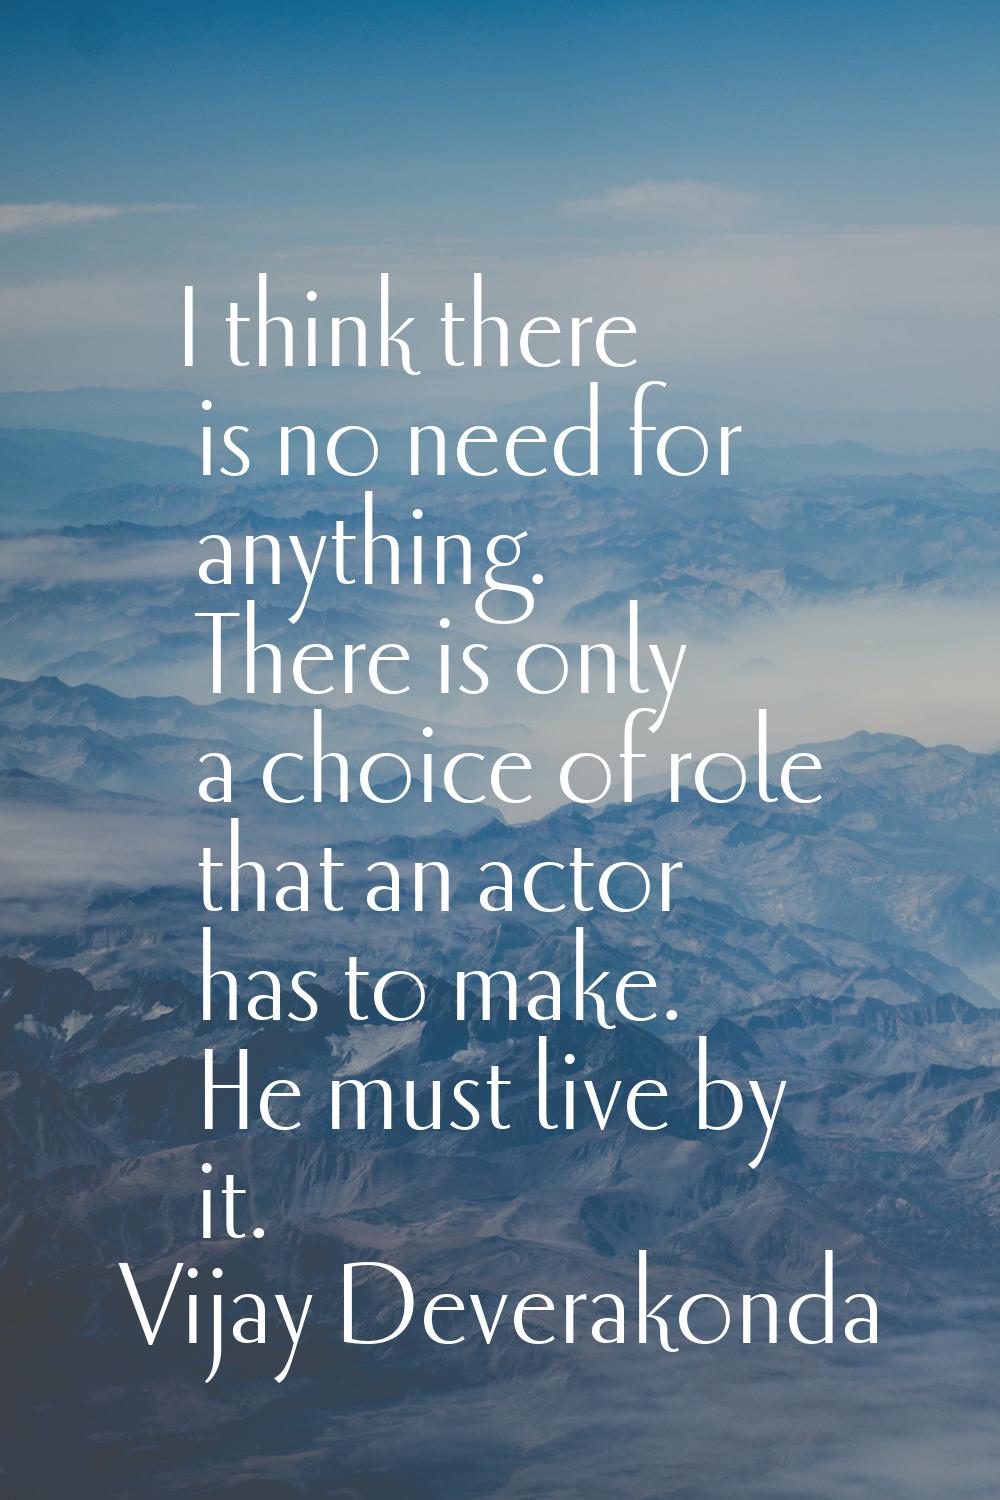 I think there is no need for anything. There is only a choice of role that an actor has to make. He